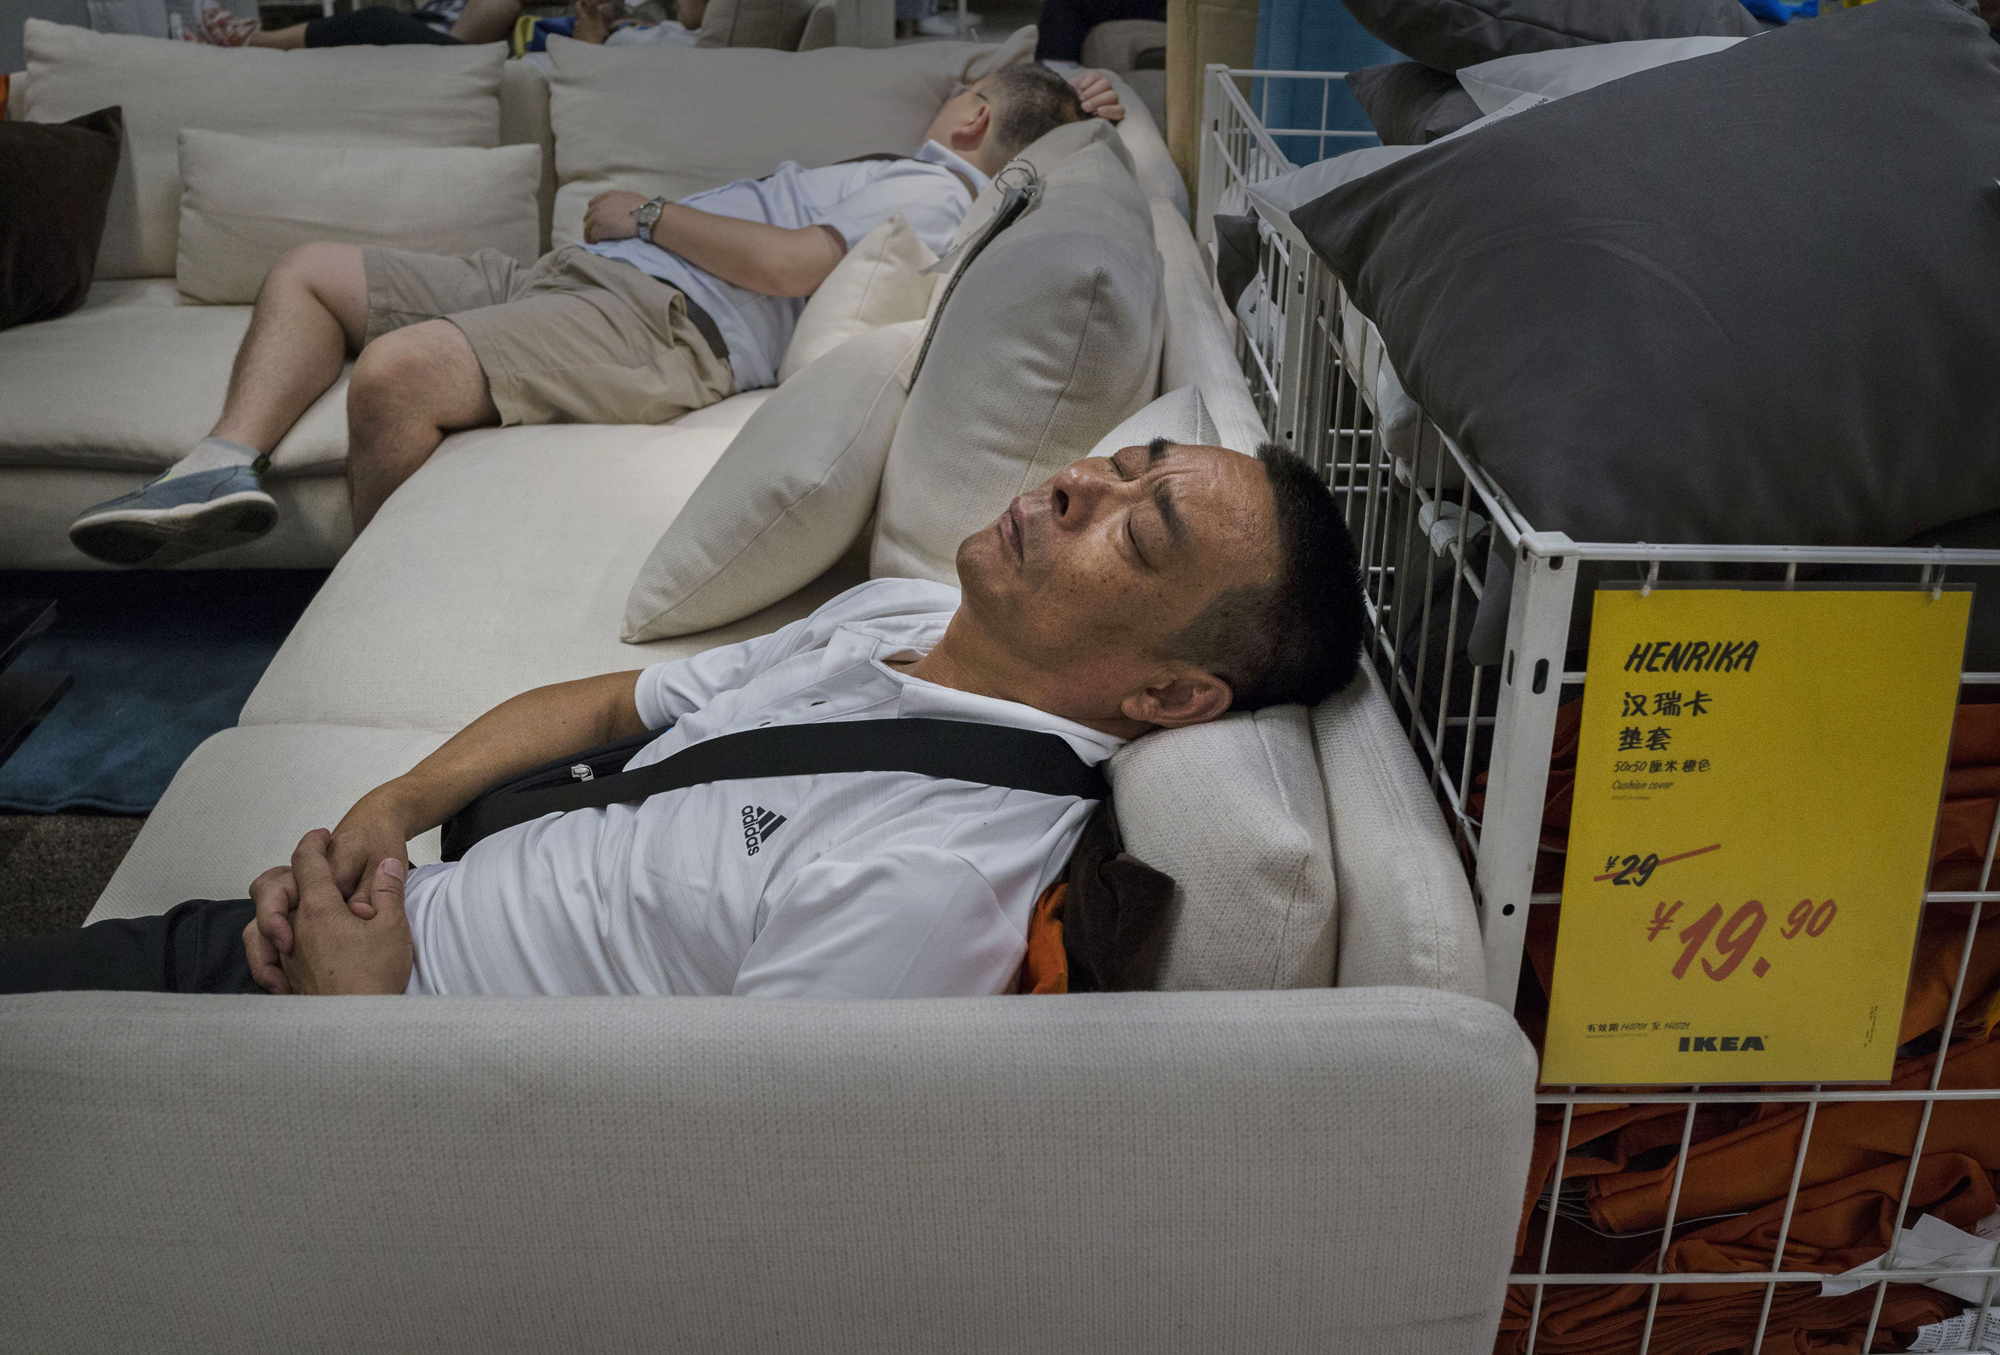 Shoppers sleep on a sofa in the showroom of the IKEA store on July 6, 2014 in Beijing.